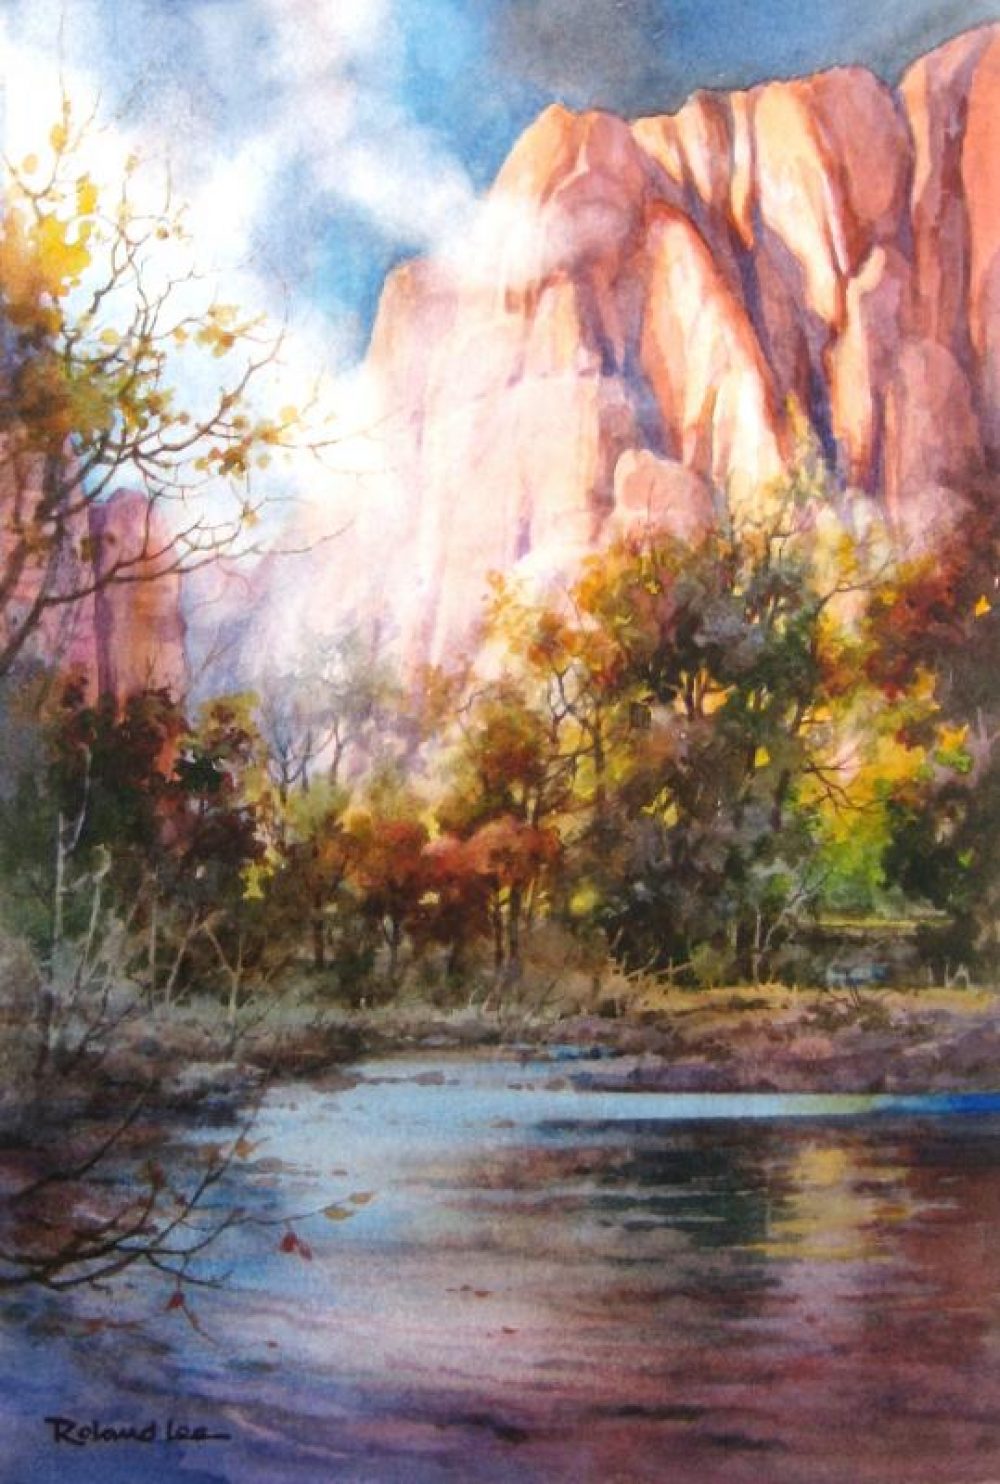 Misty River - Zion National Park - Watercolor Painting of Virgin River in Zion National Park by Roland Lee